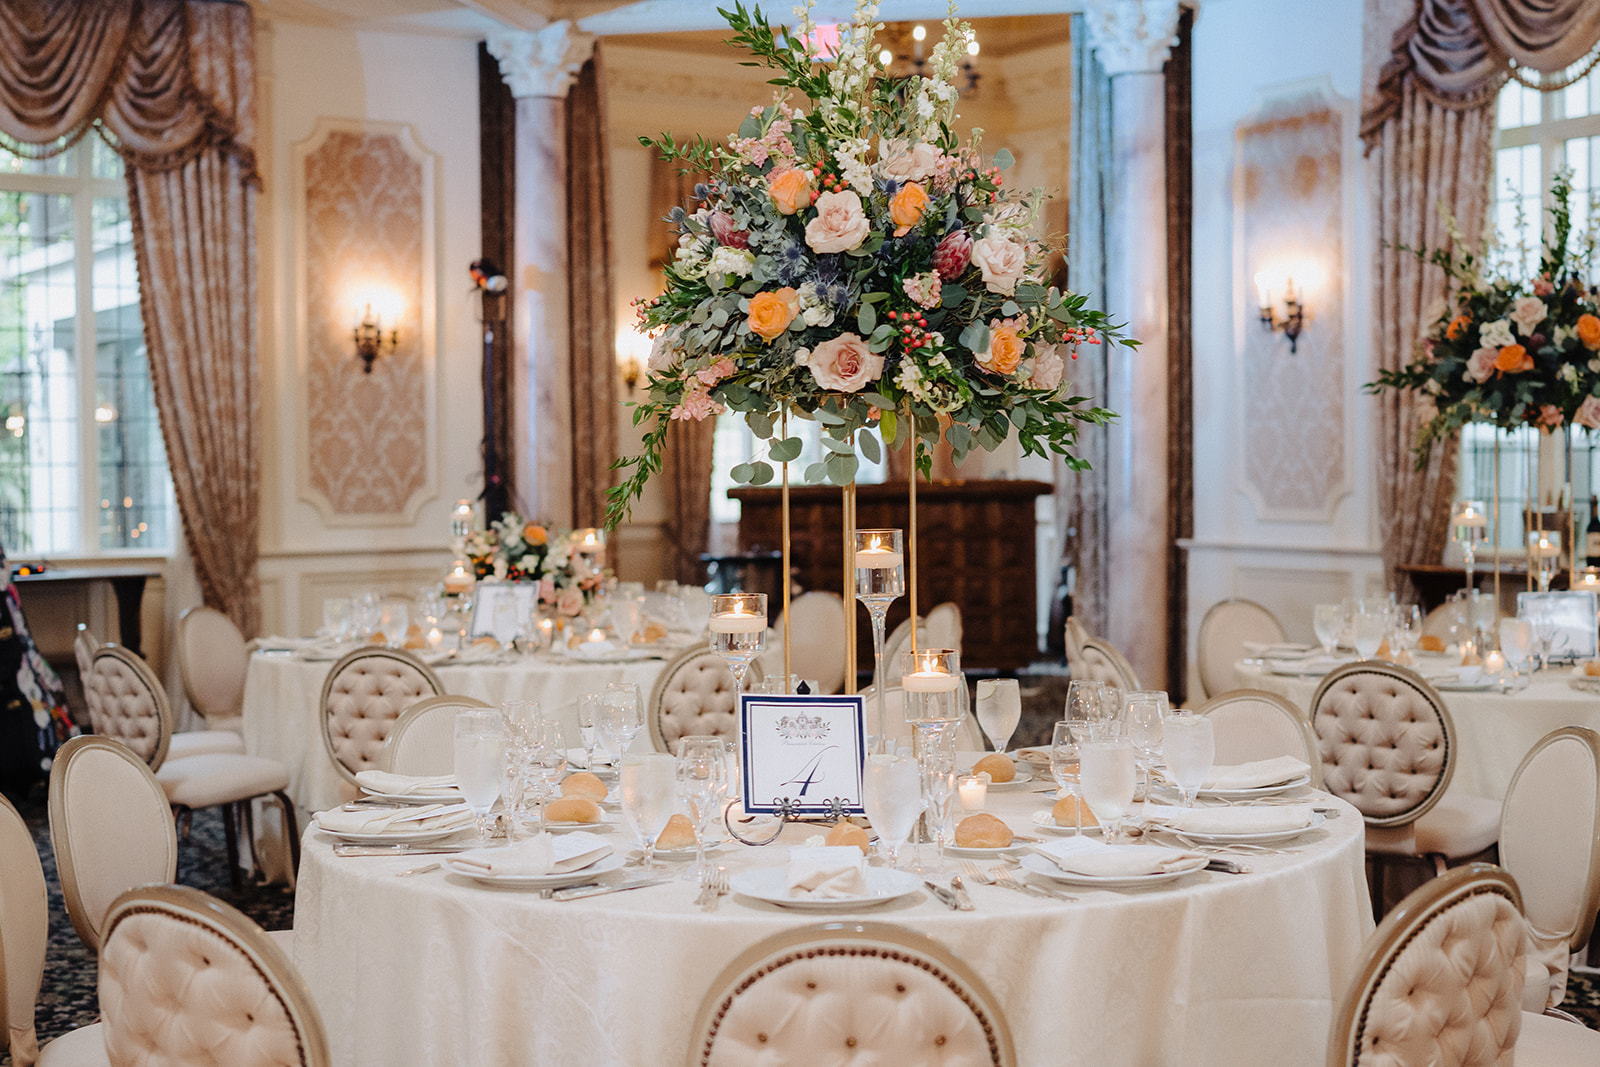 Pleasantdale Chateau Wedding Cost and Planning Guide. Wedding reception table set up with elegant floral centerpiece.